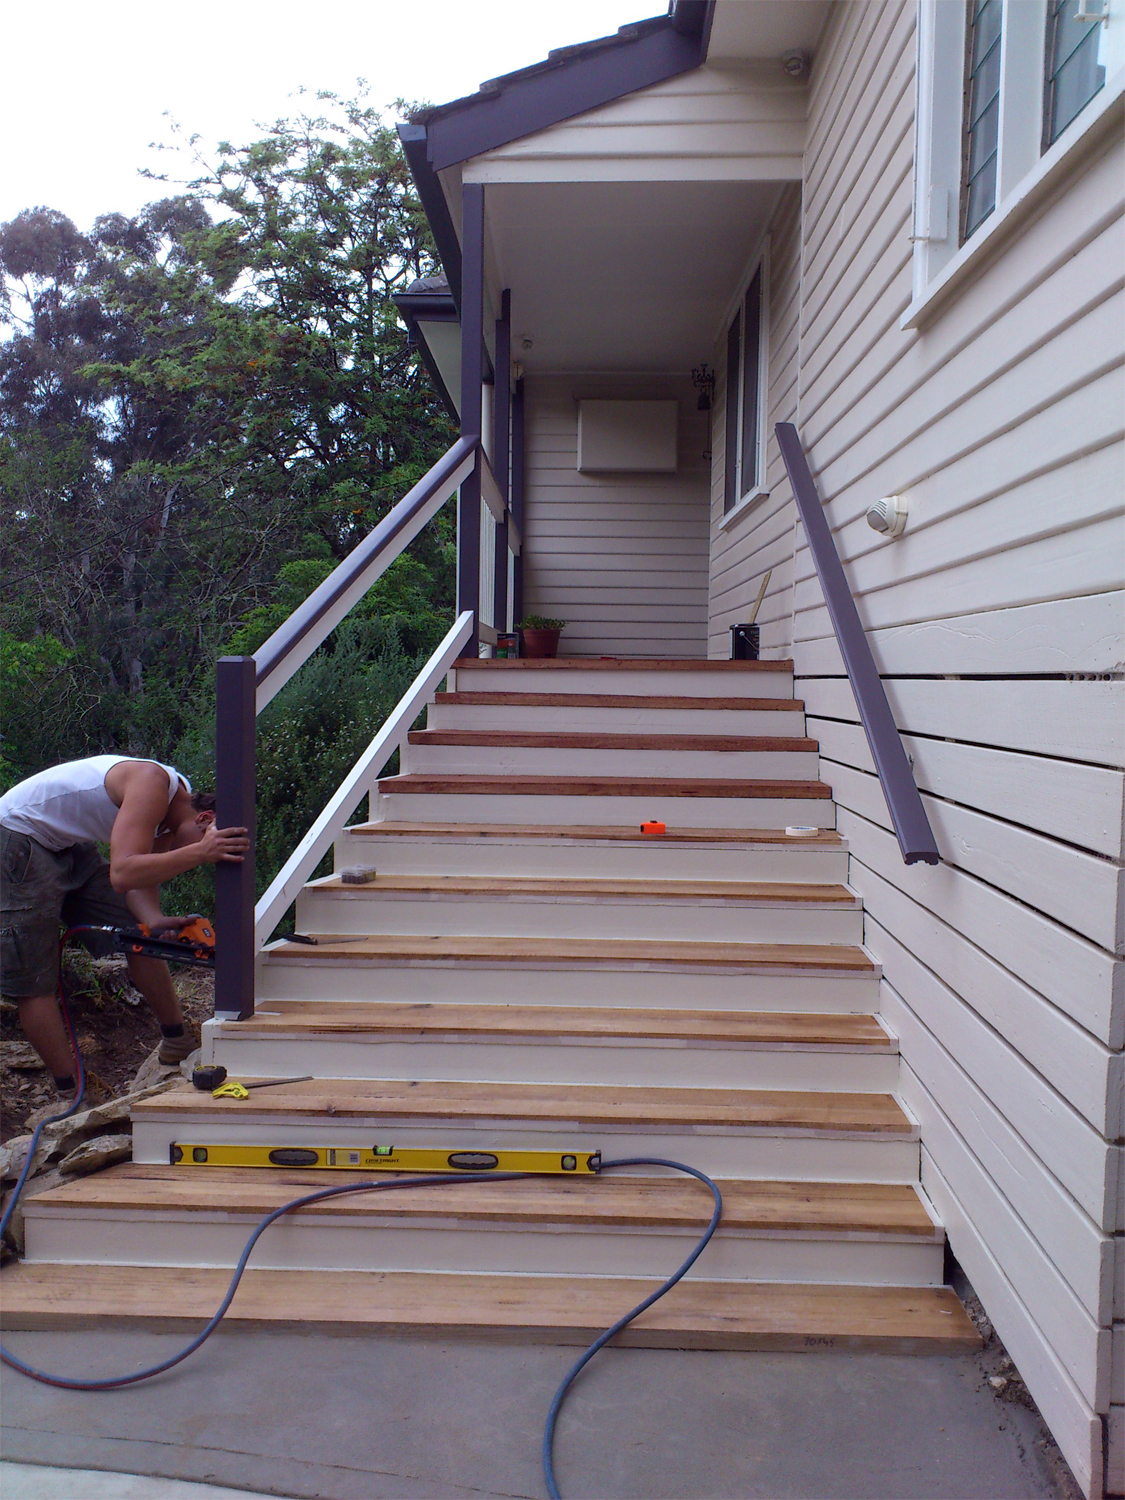 jbcs Project - sloping site revisit - staircase 05